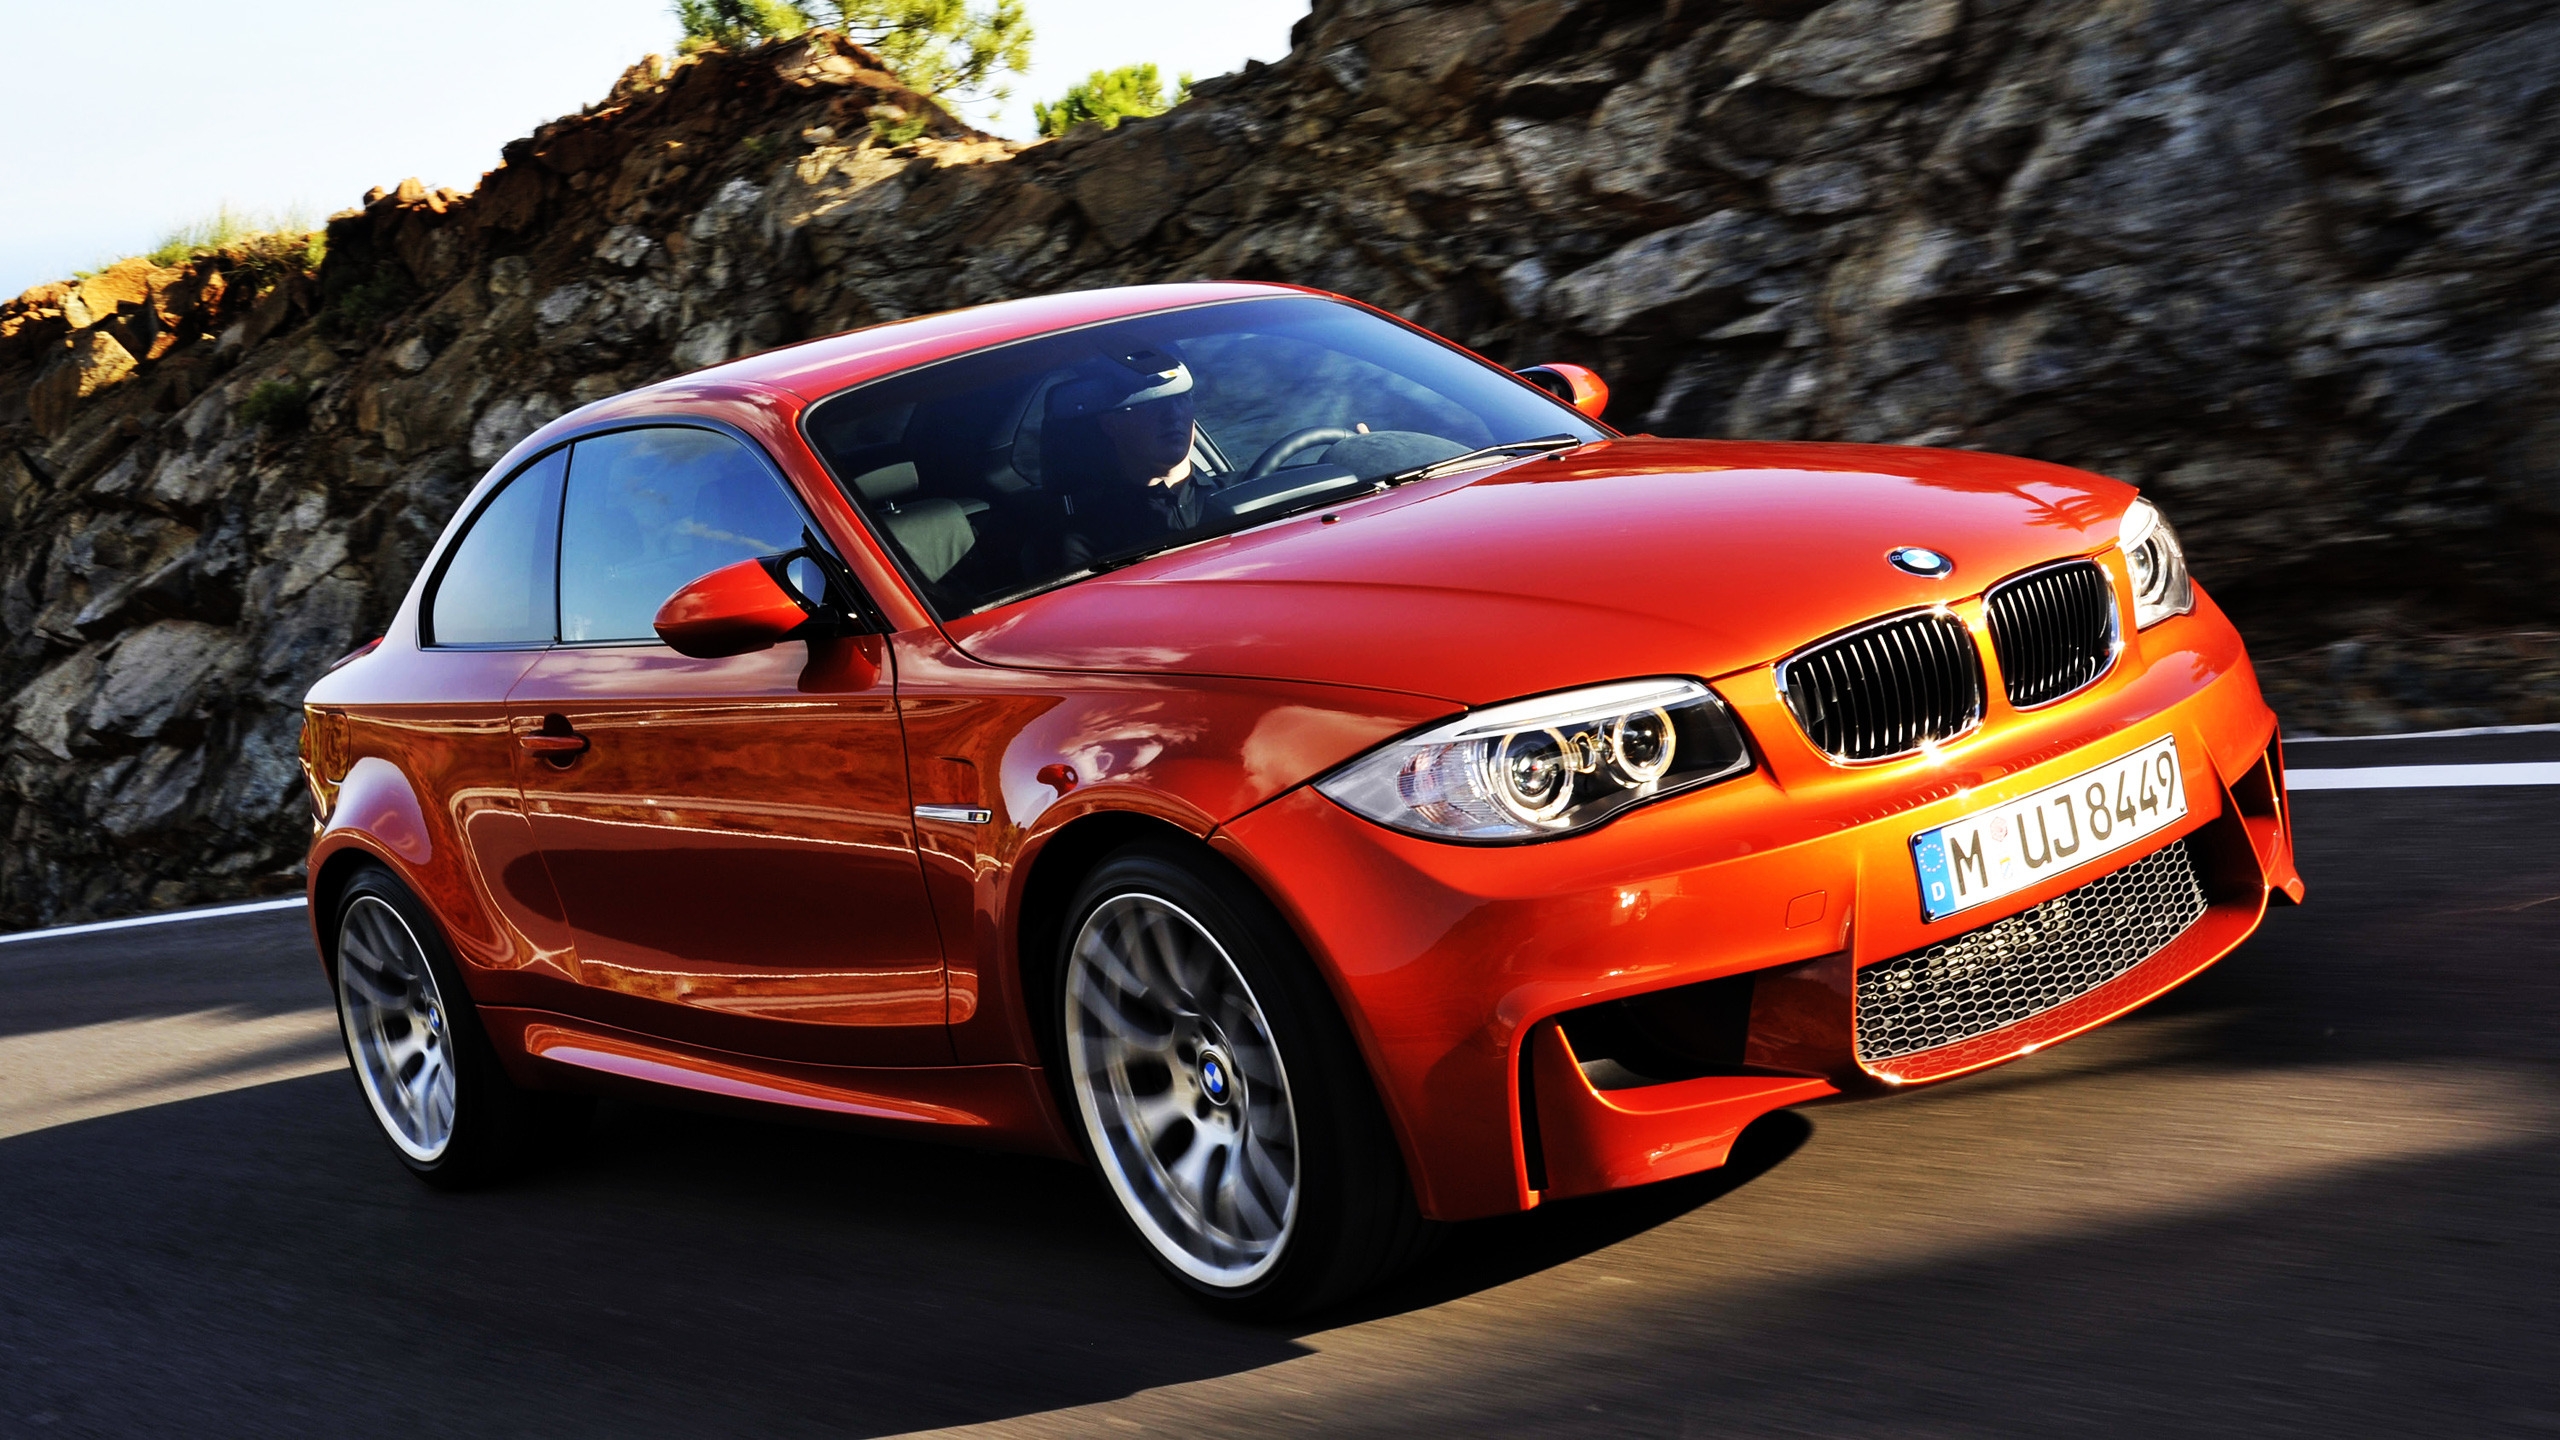 2011 BMW 1 Series M for 2560x1440 HDTV resolution